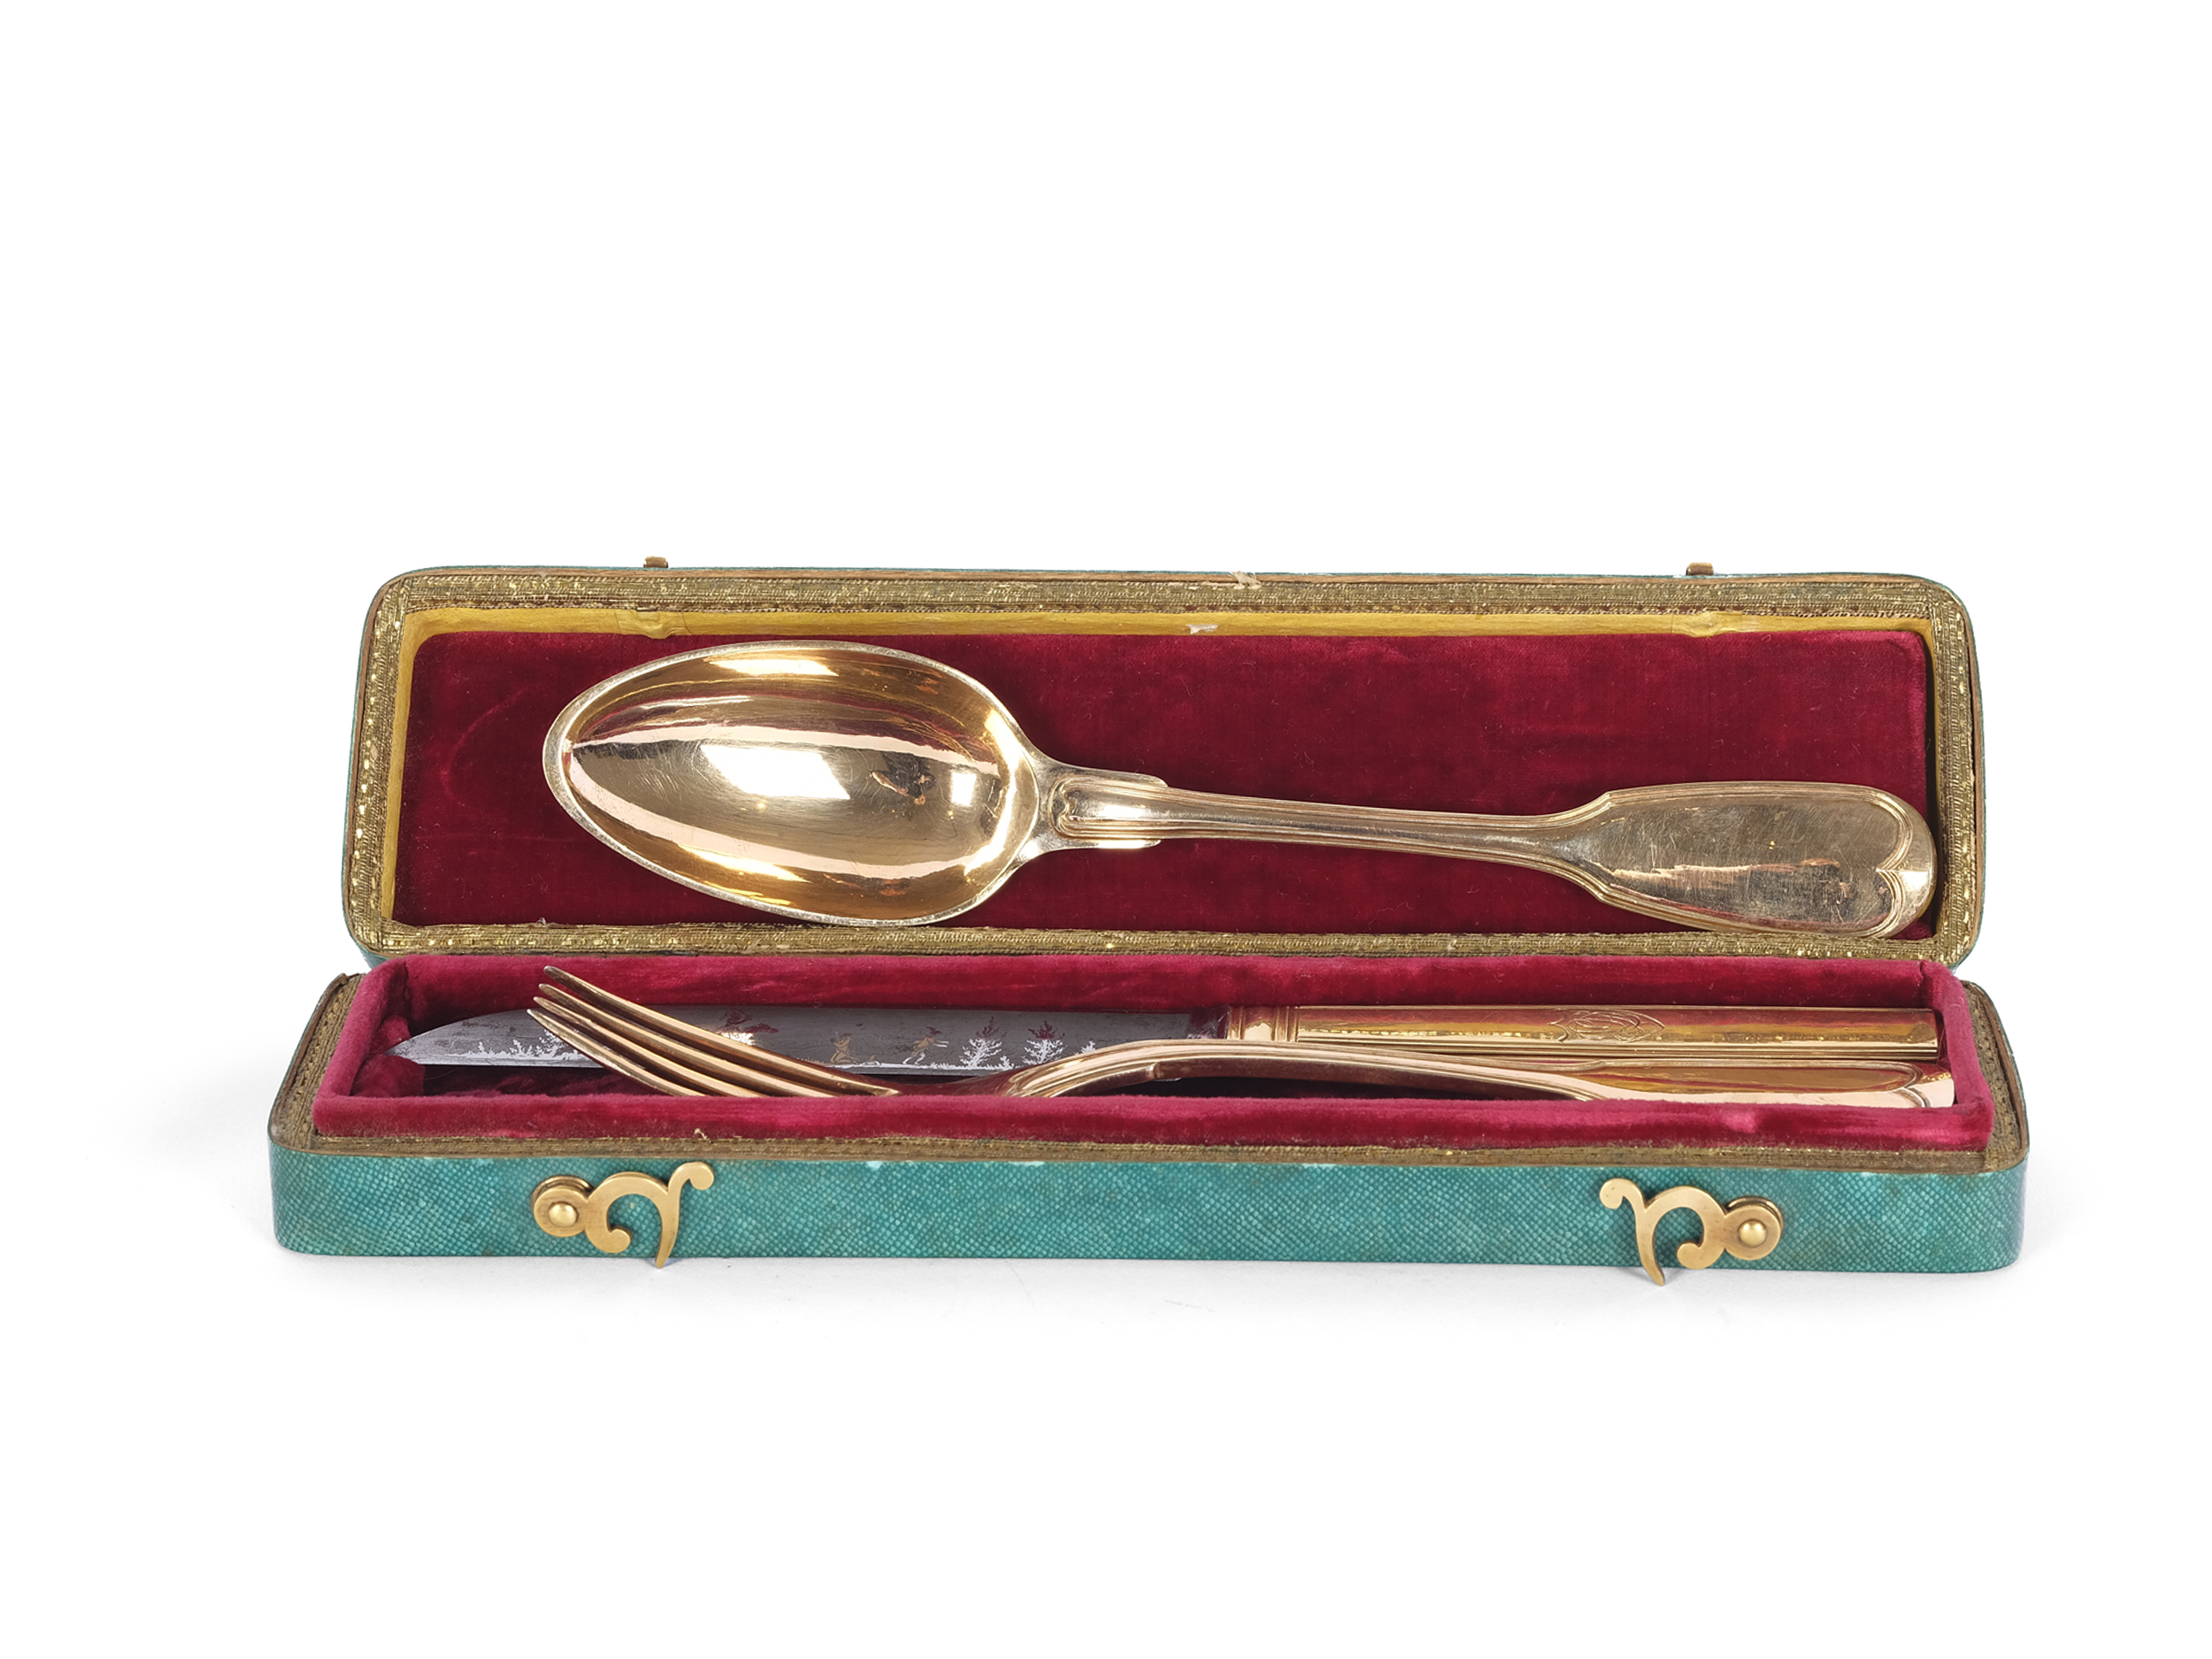 Travelling cutlery in a case, France, late 18th century - Image 3 of 5